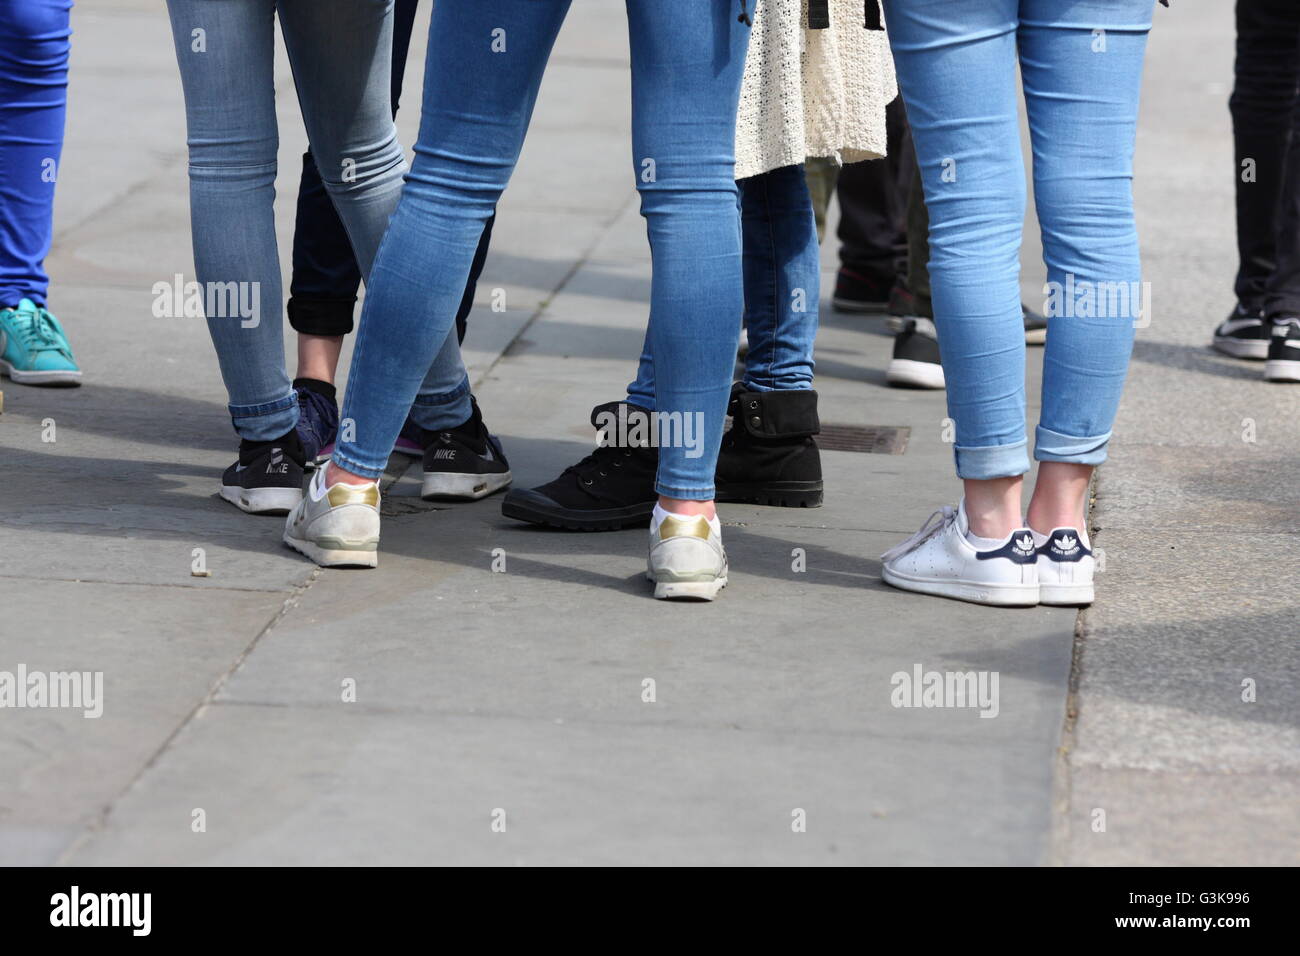 The legs of a crowd of youths standing in Trafalgar Square, London, England Stock Photo